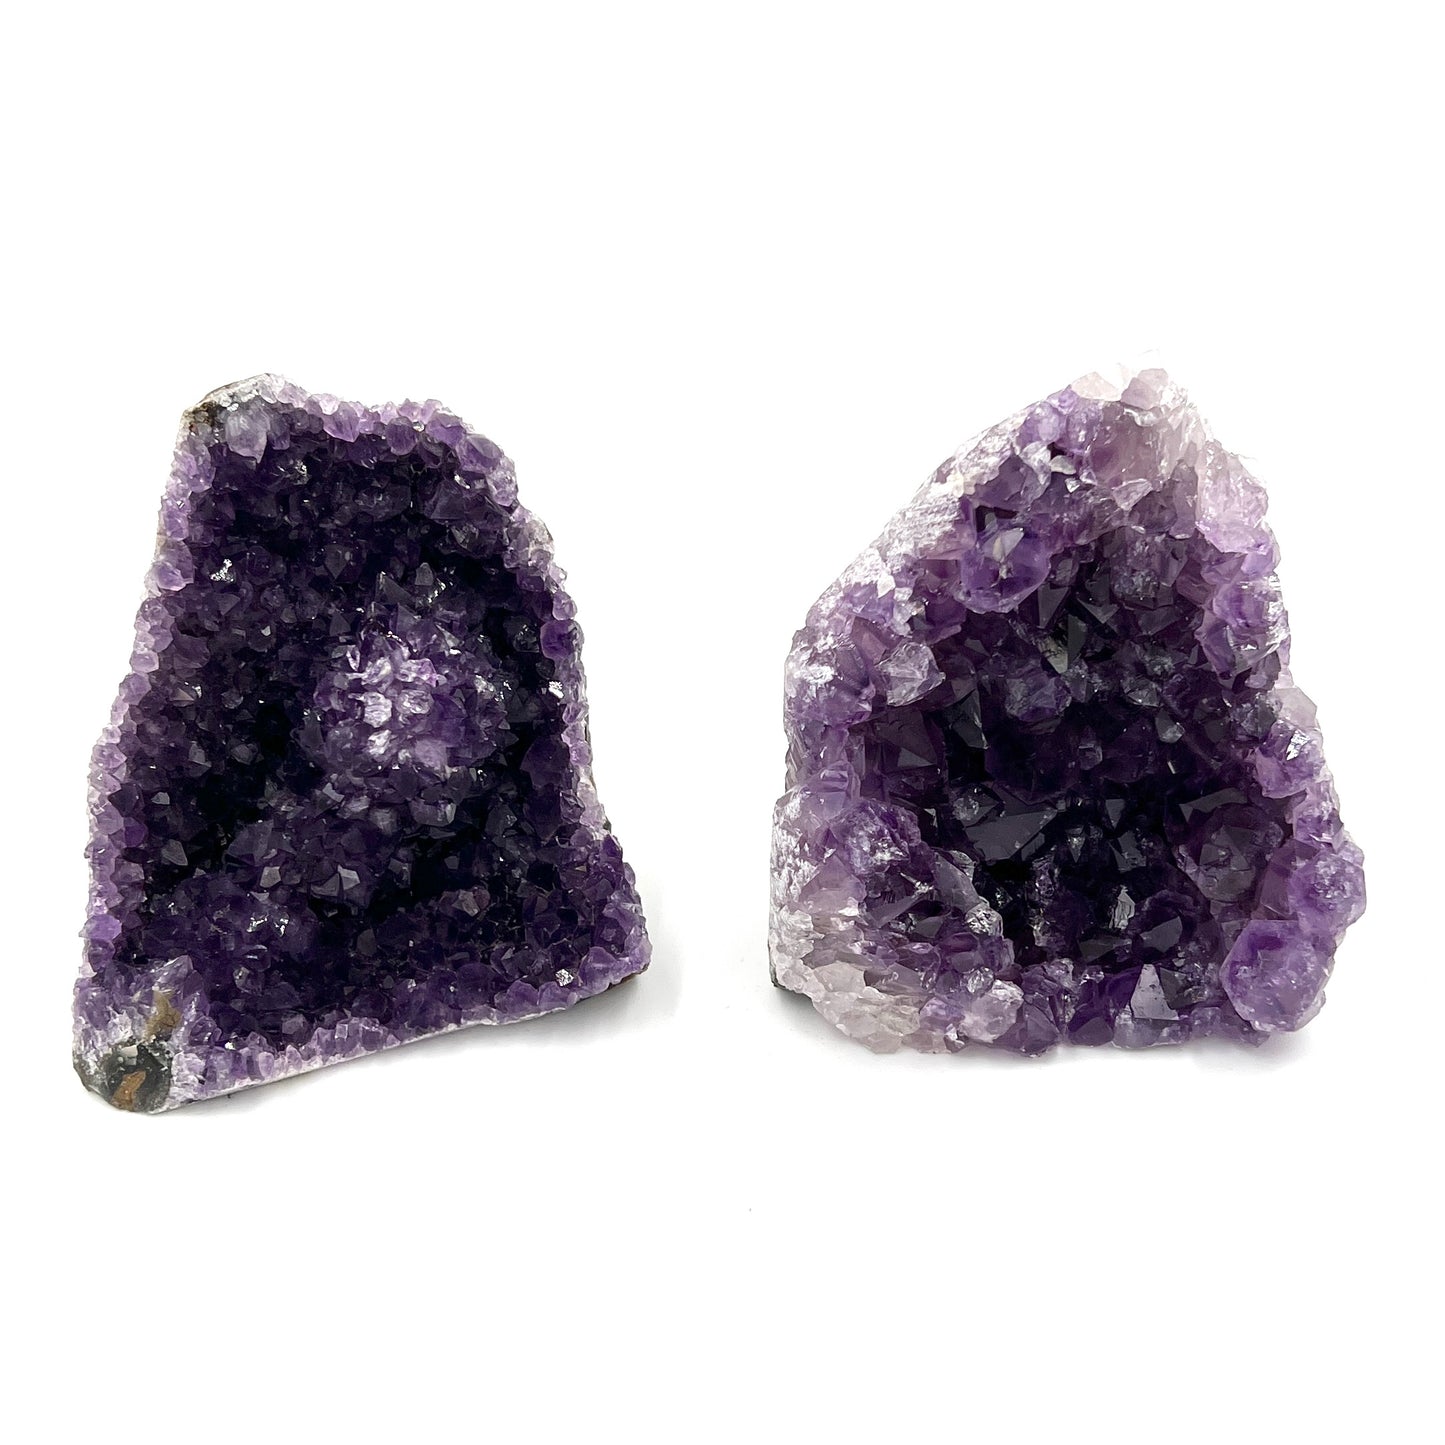 A+ Amethyst Cathedrals